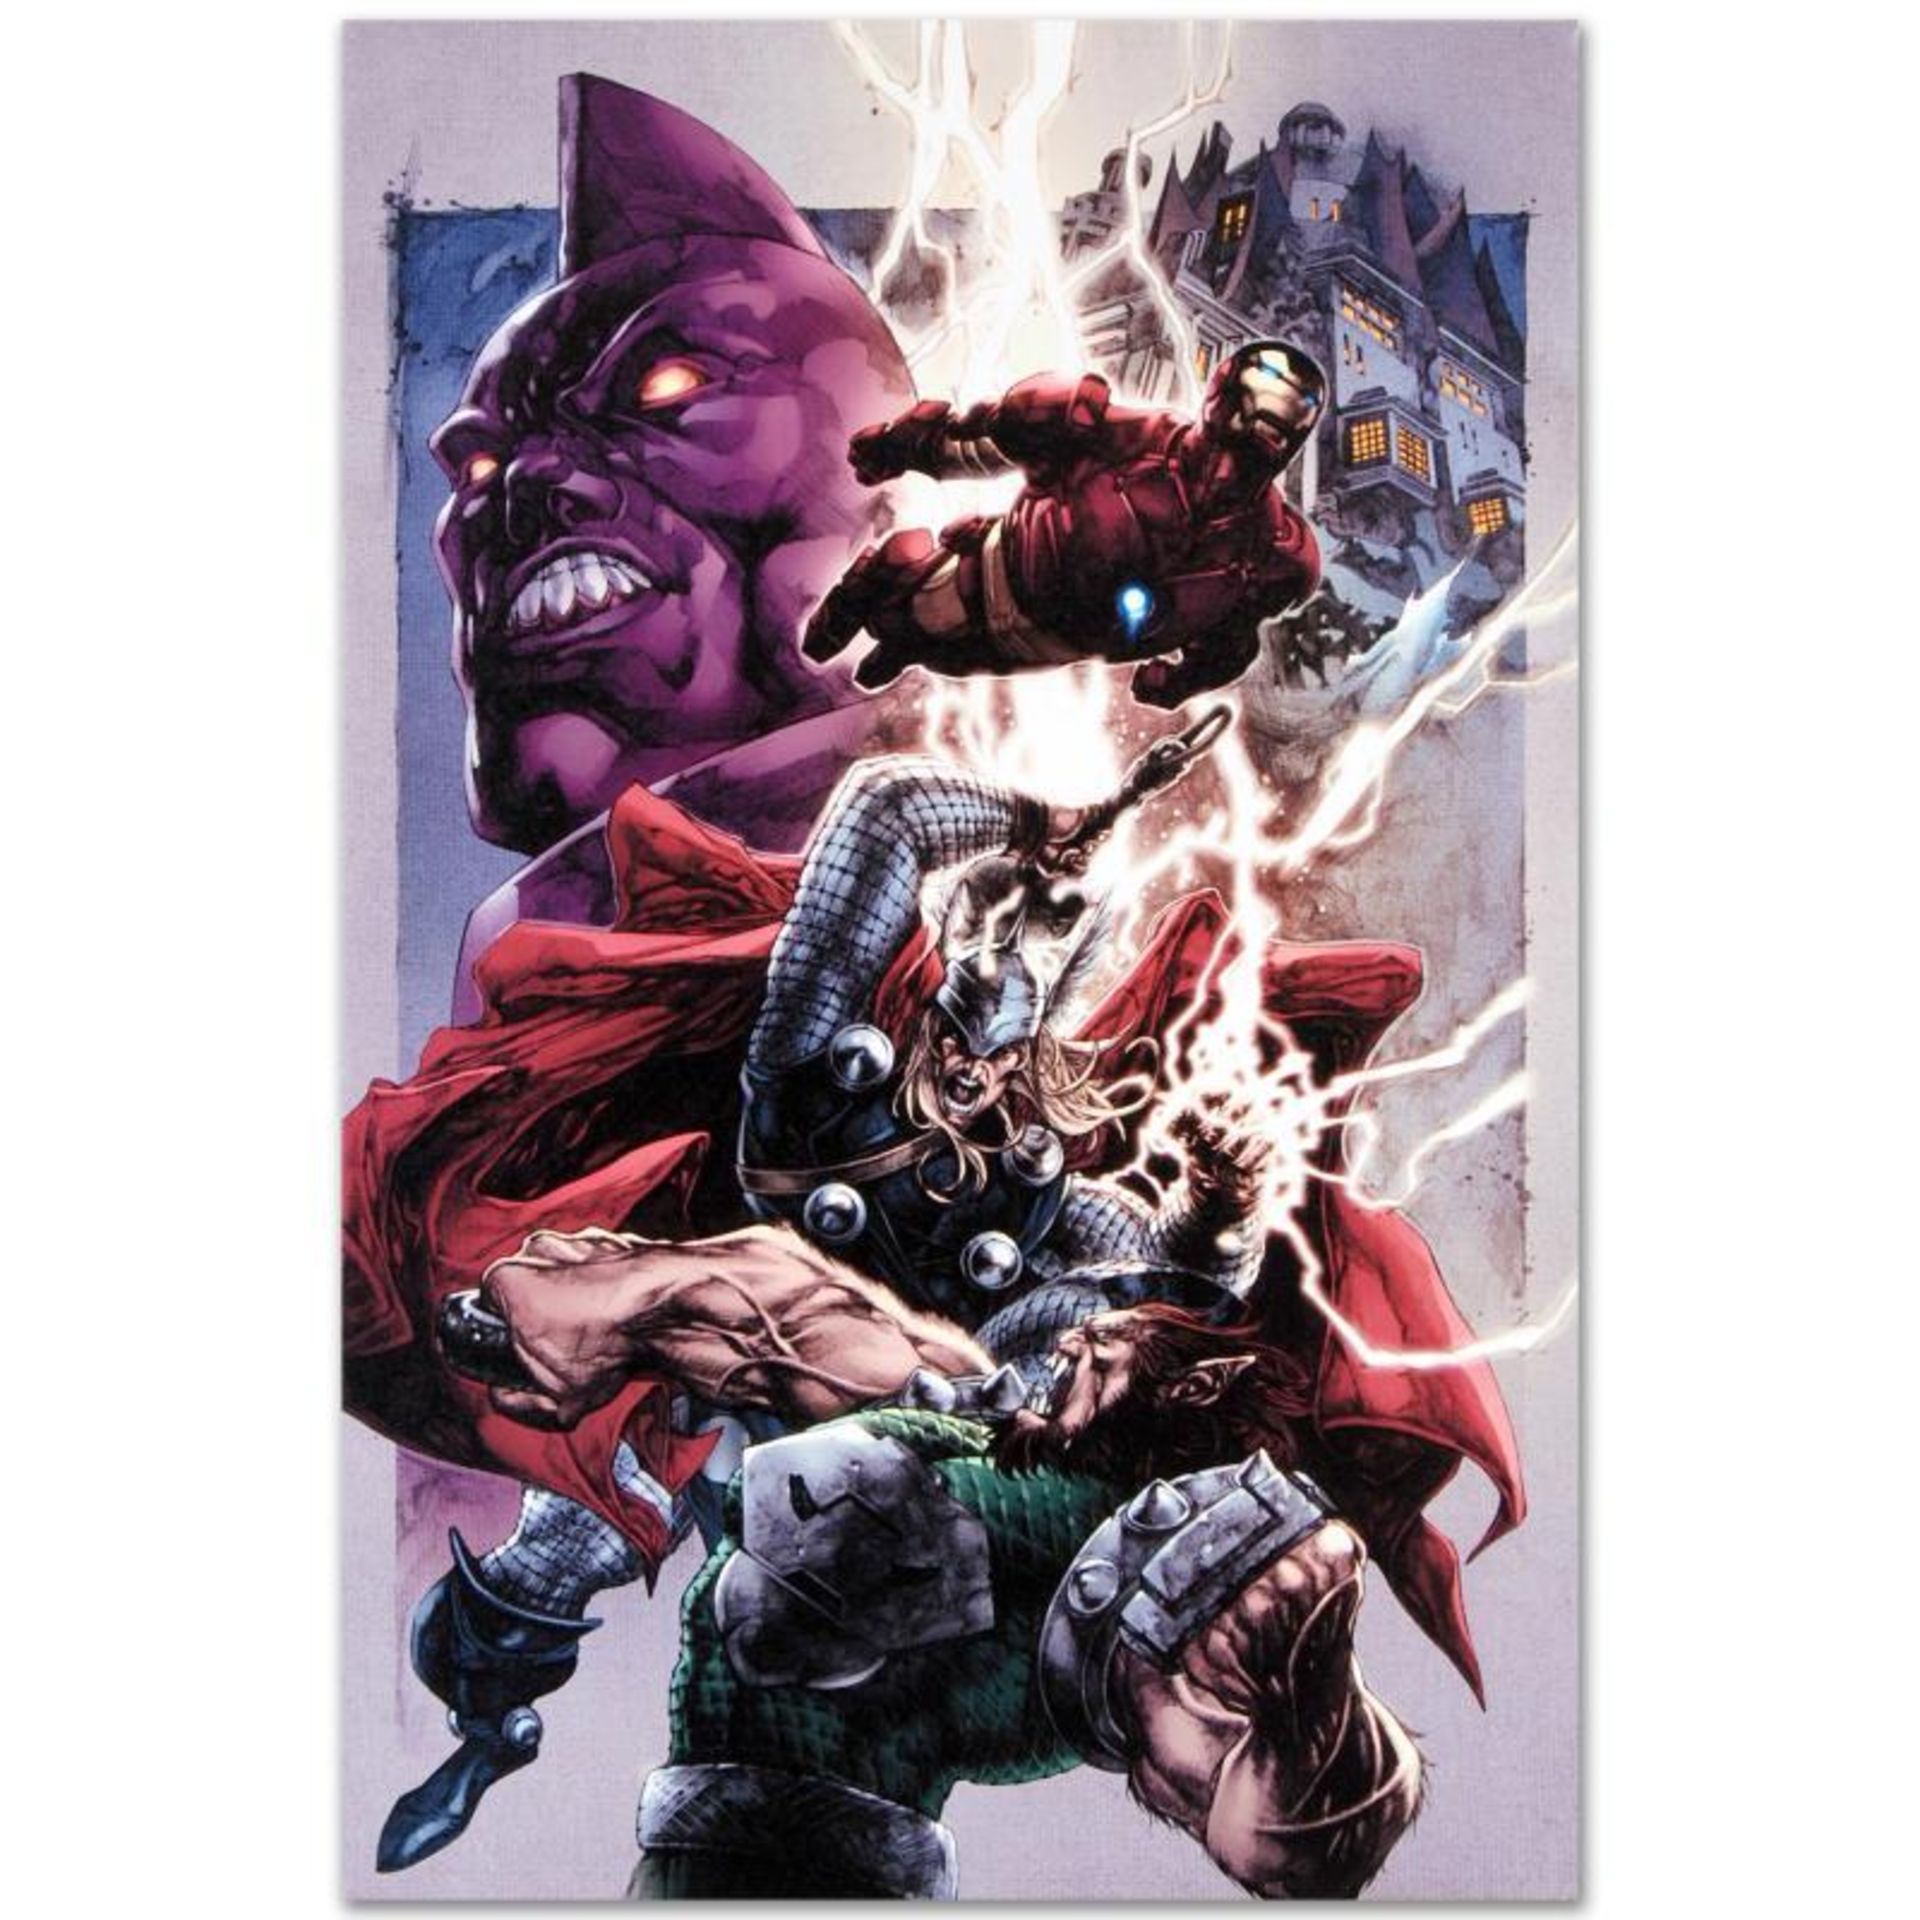 Marvel Comics "Iron Man/ Thor #2" Numbered Limited Edition Giclee on Canvas by S